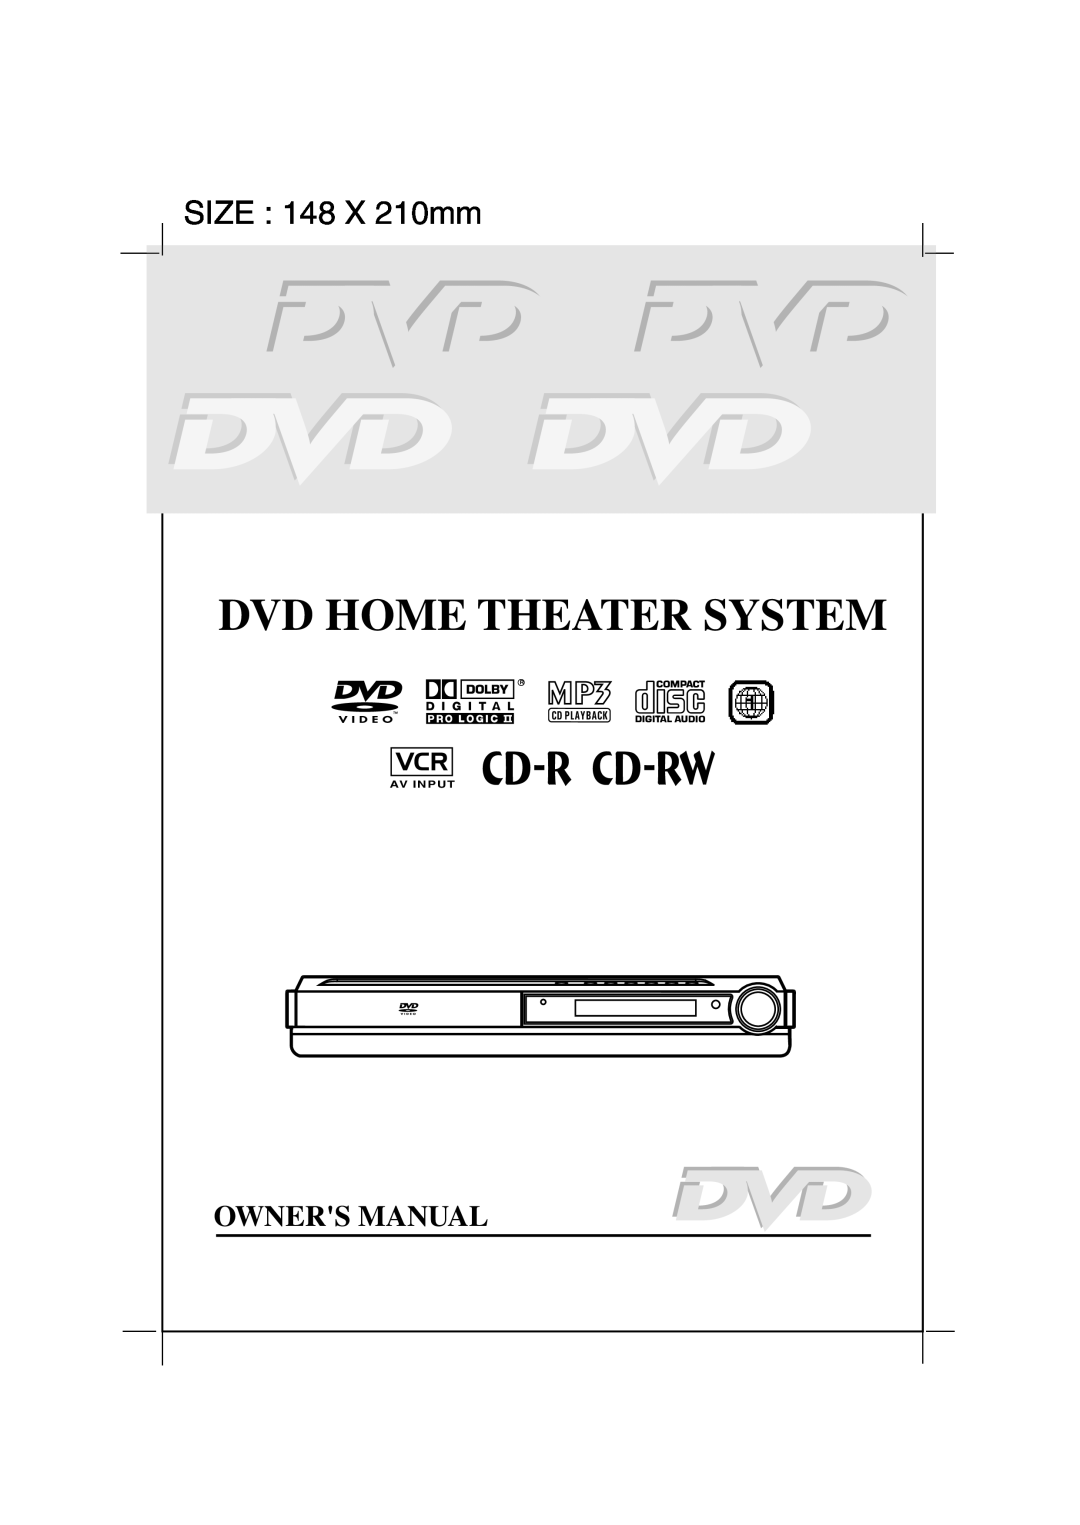 Audiovox DVD Home Theatre System CD-R/RW CD Playback owner manual Vcr Cd-R Cd-Rw, Dvd Home Theater System, Cd Playback 